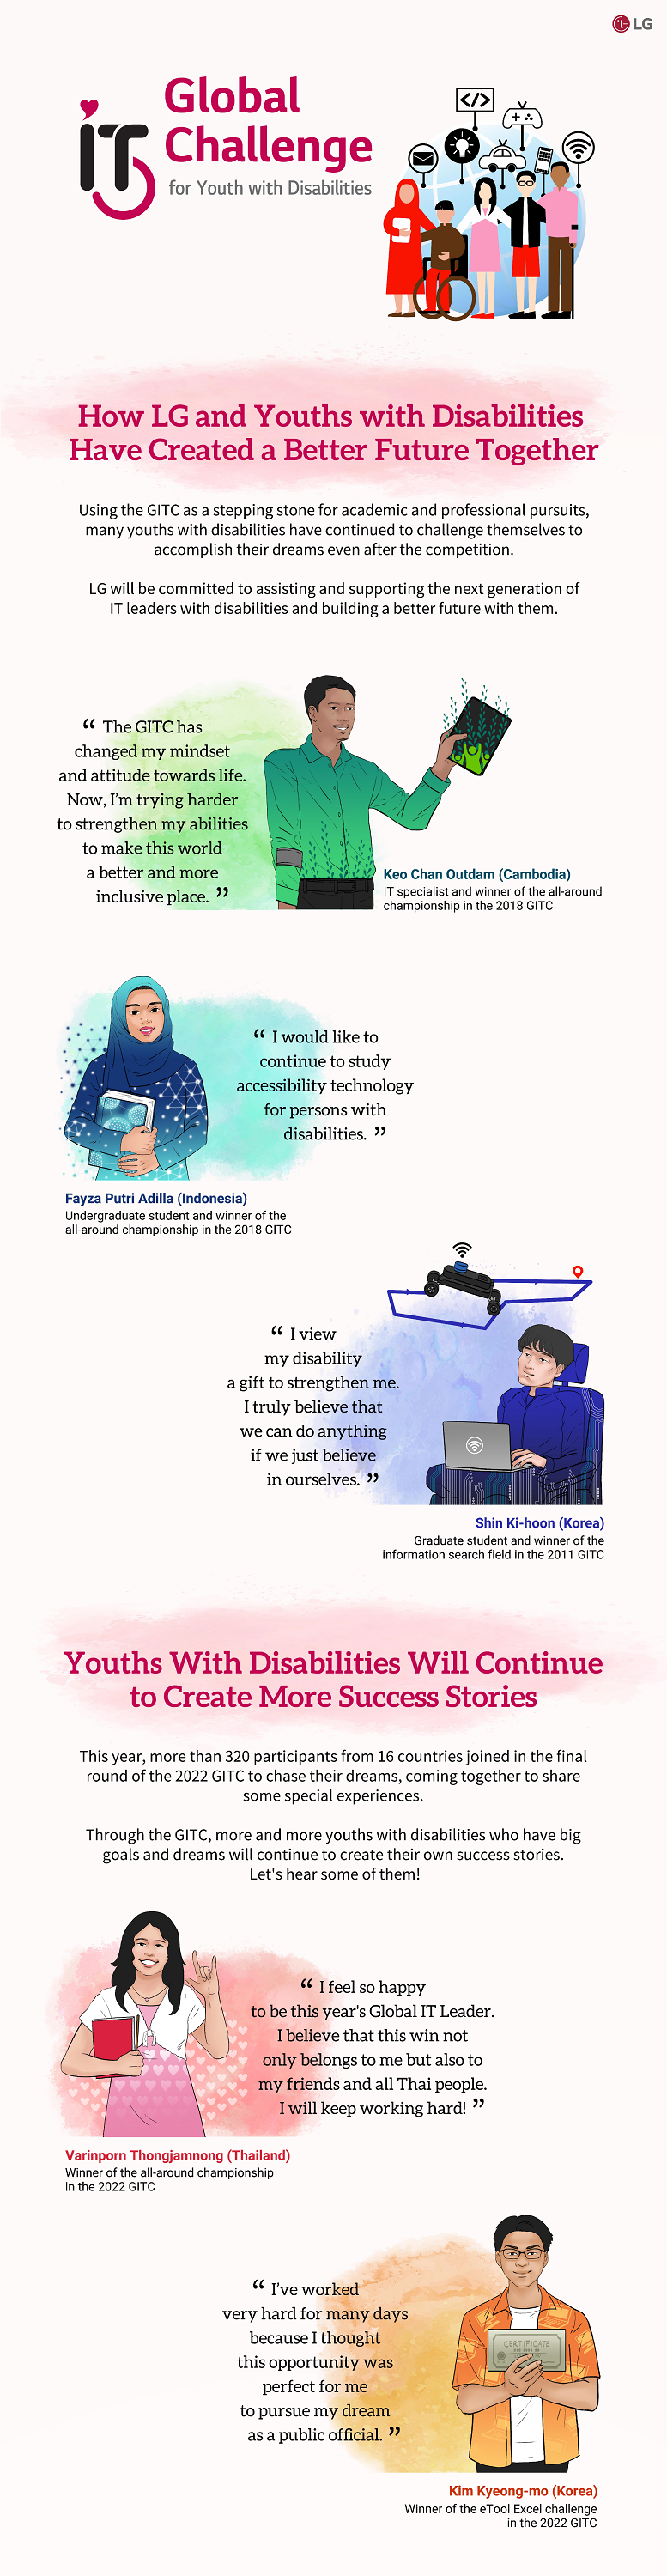 Infographic of LG's Global IT Challenge for Youth with Disabilities (GITC) program